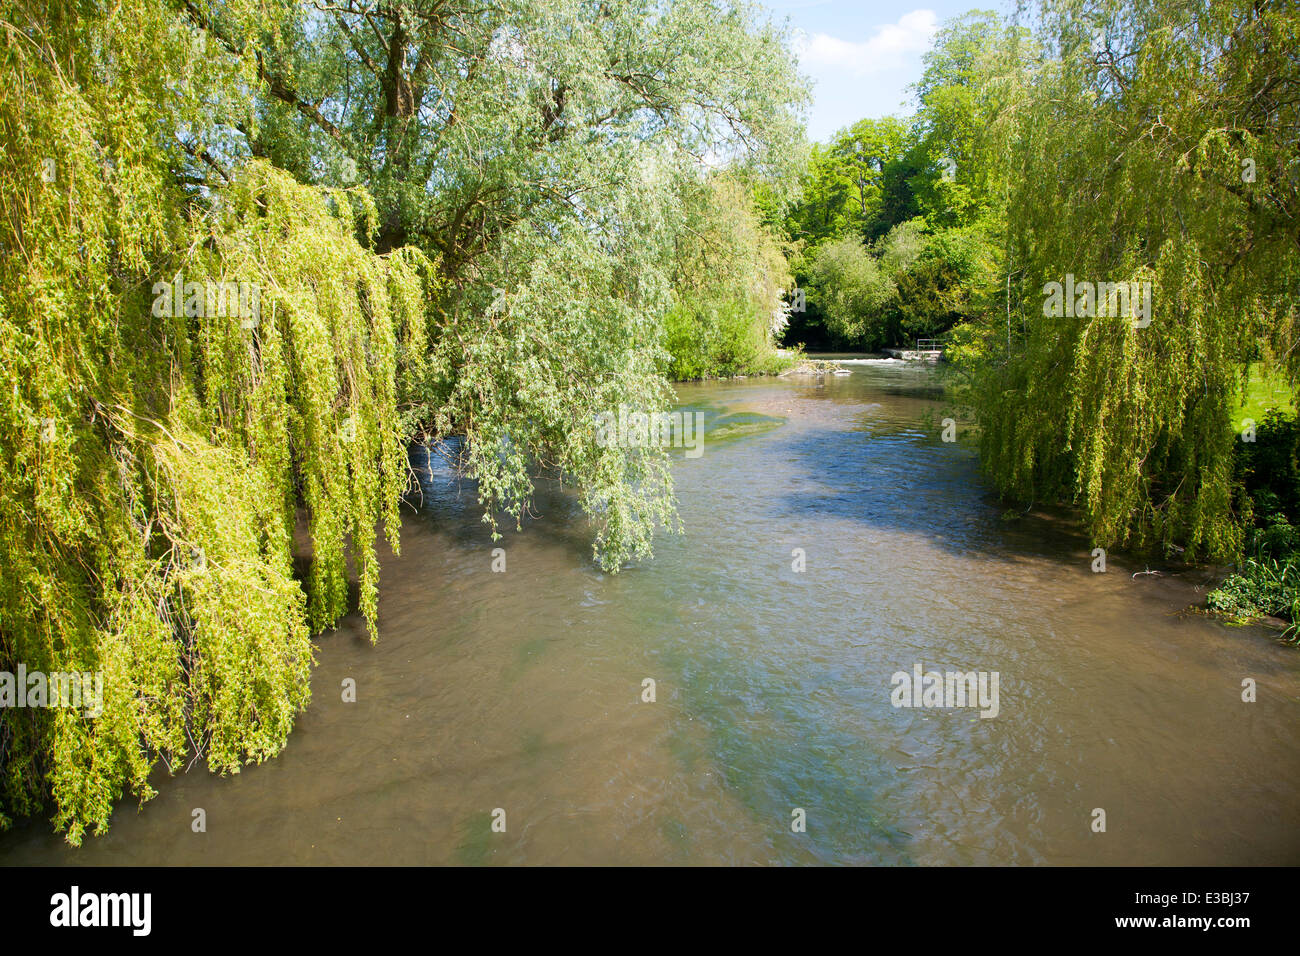 River Avon chalk river at Amesbury, Wiltshire, England overhanging willow tree branches Stock Photo